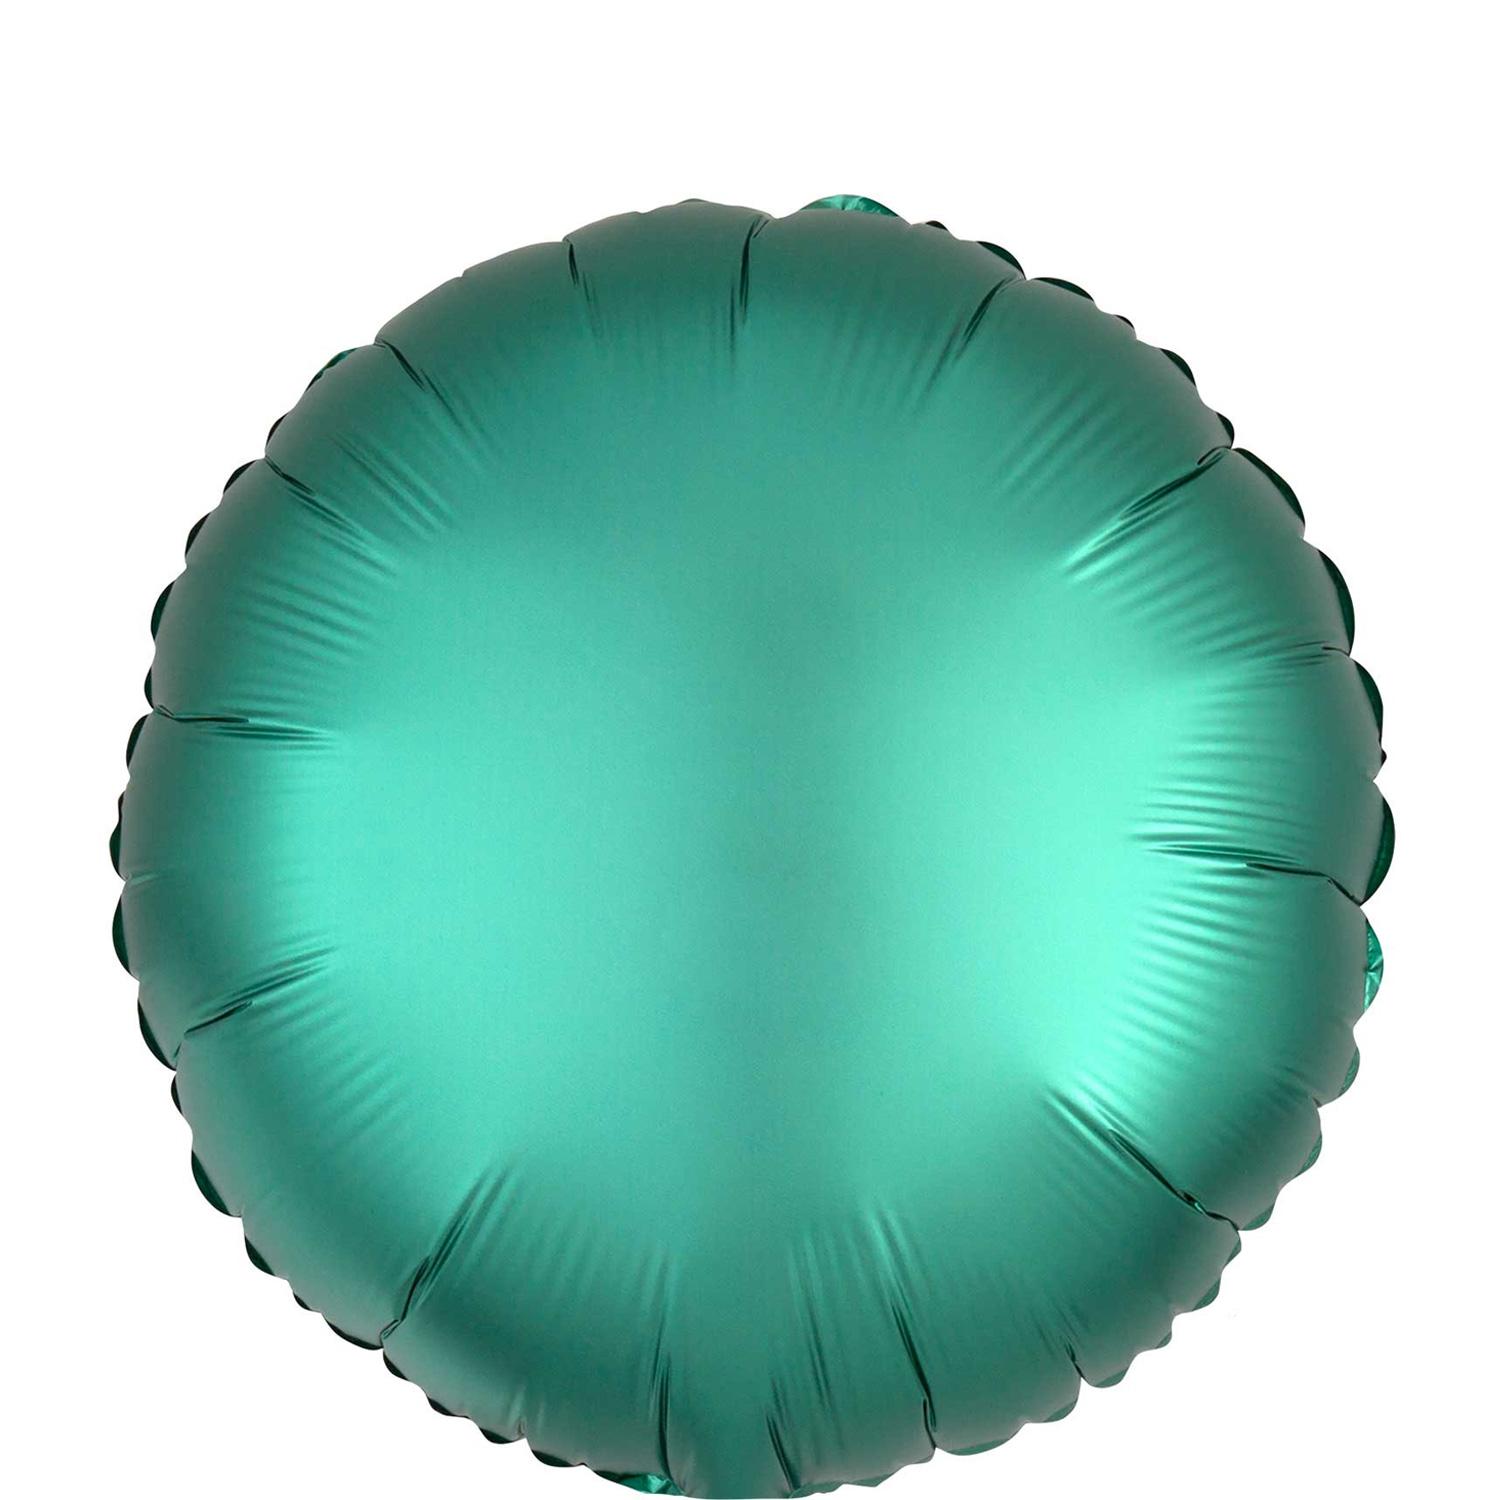 Satin Luxe Jade Round Foil Balloon 45cm Balloons & Streamers - Party Centre - Party Centre